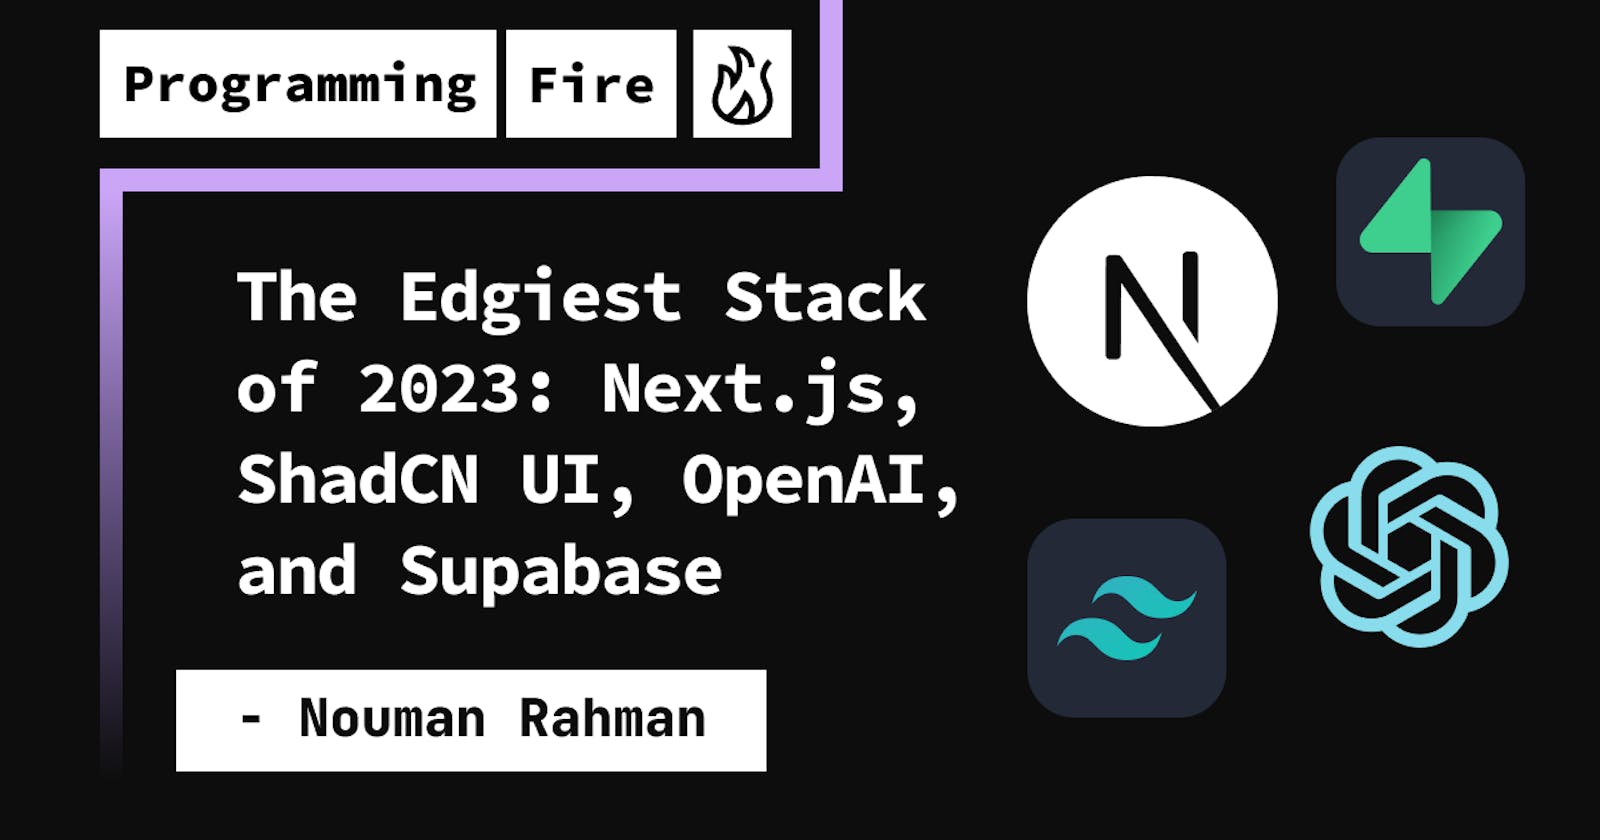 The Edgiest Stack of 2023: Next.js, ShadCN UI, OpenAI, and Supabase